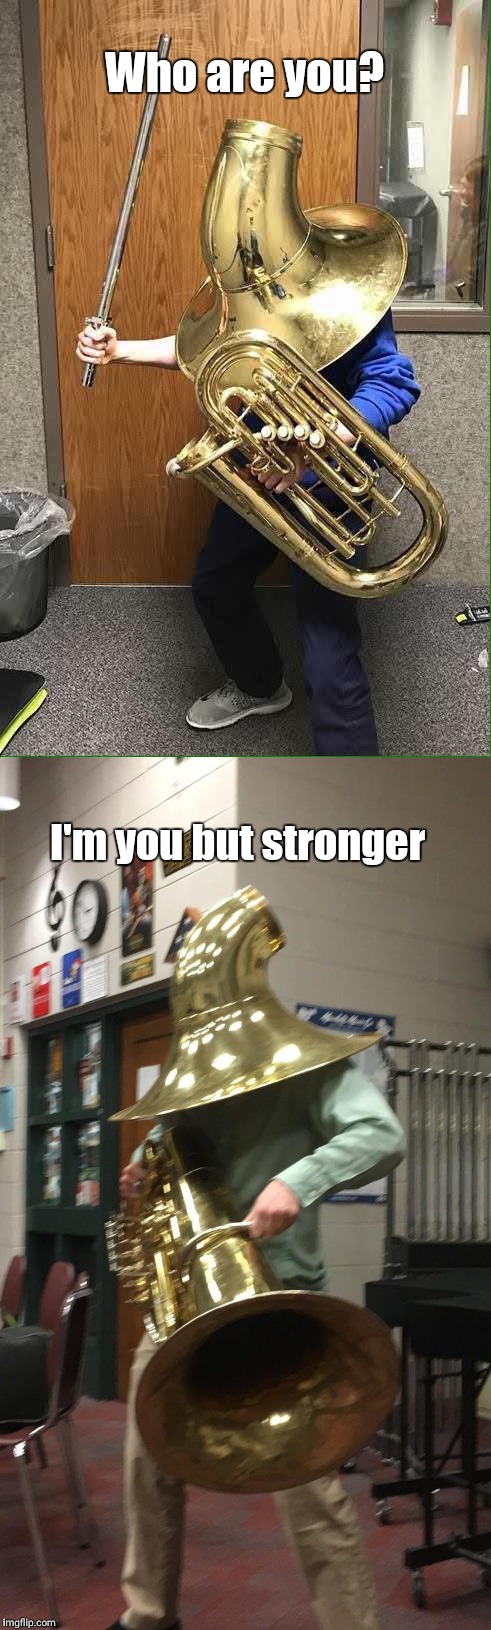 Tuba Negroid meets Brassmaster | Who are you? I'm you but stronger | image tagged in i'm you but stronger,tuba negroid,brassmaster | made w/ Imgflip meme maker